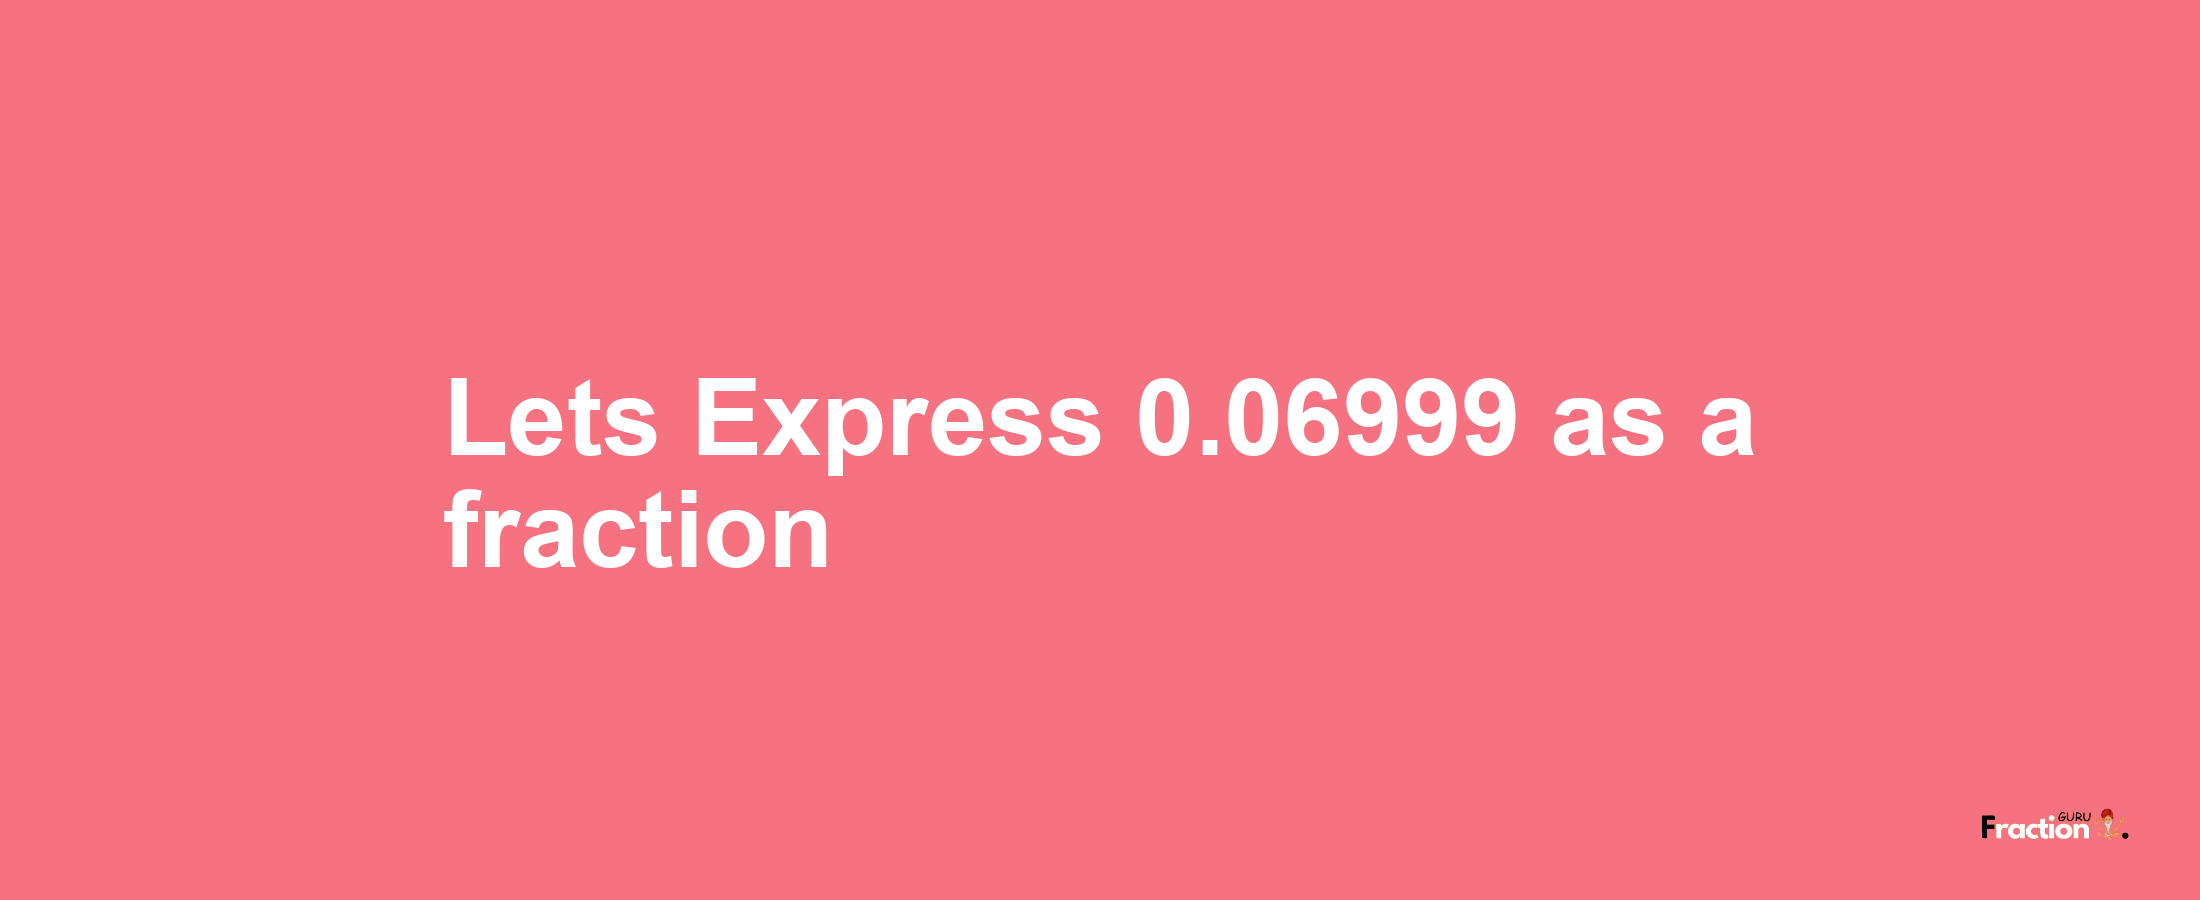 Lets Express 0.06999 as afraction